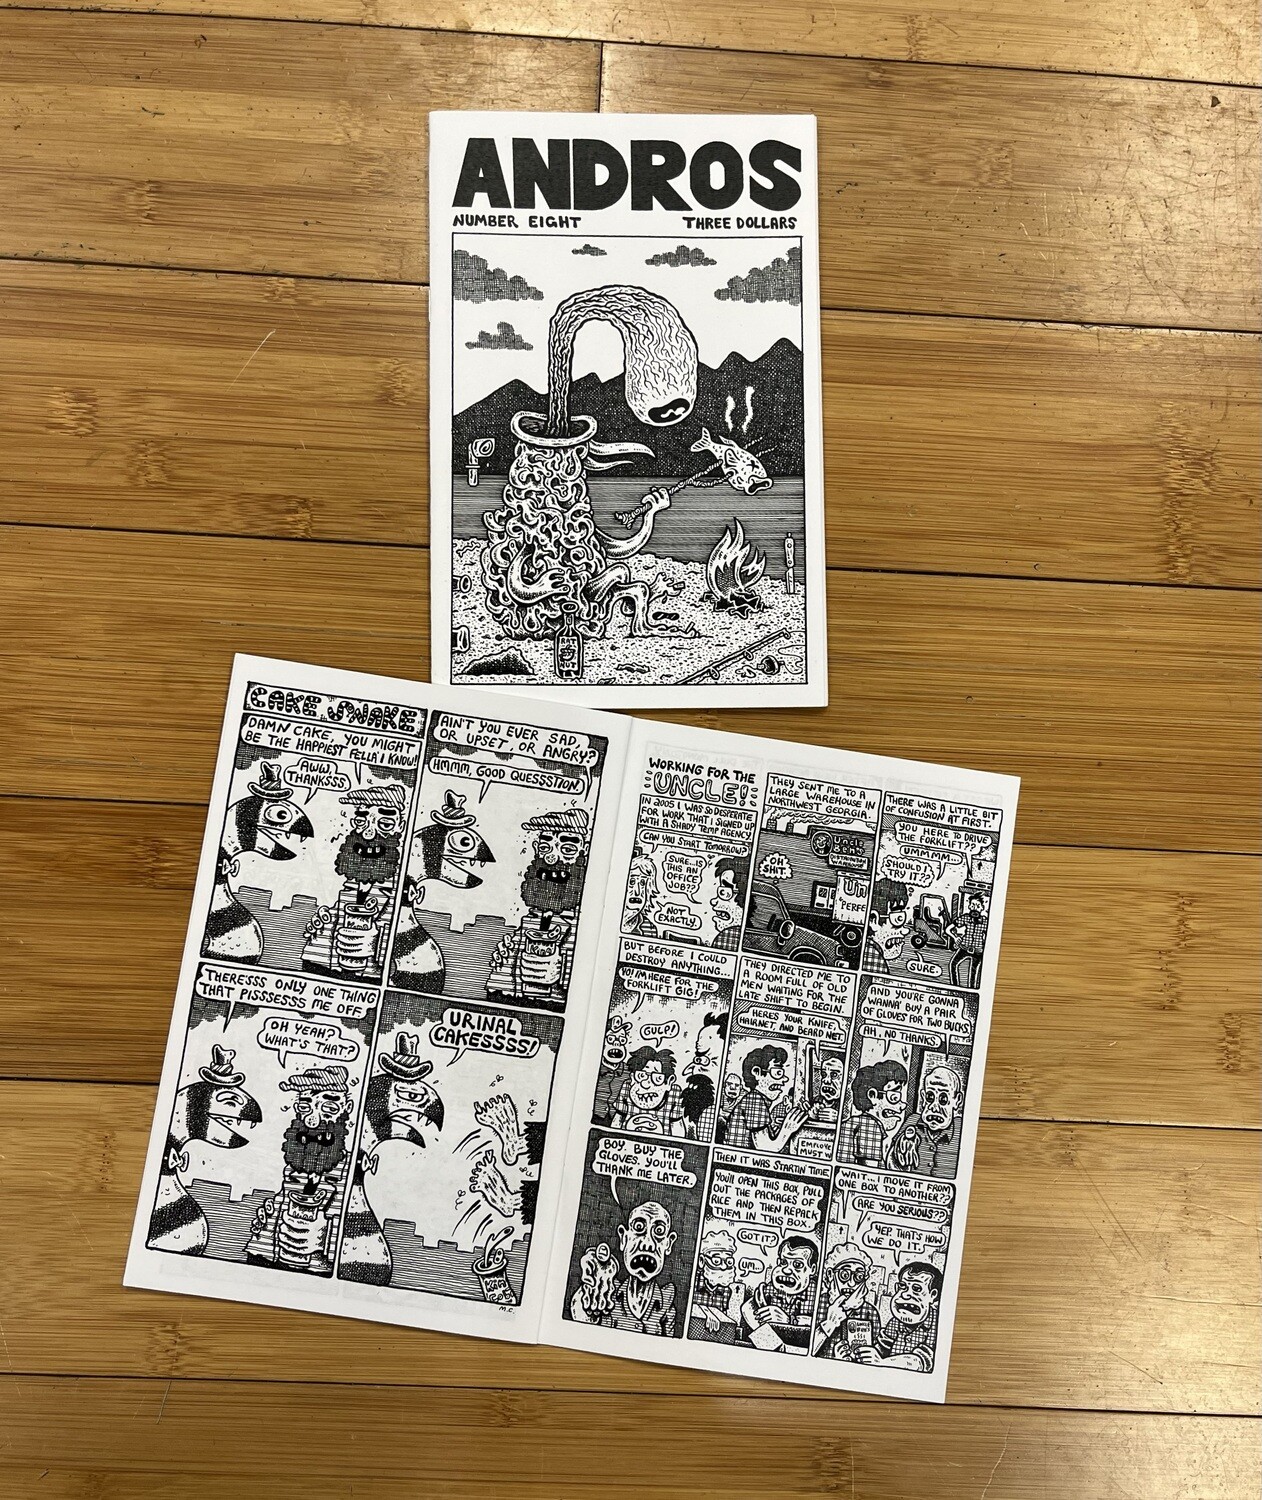 Andros #8 - Comic by Max Clotfelter